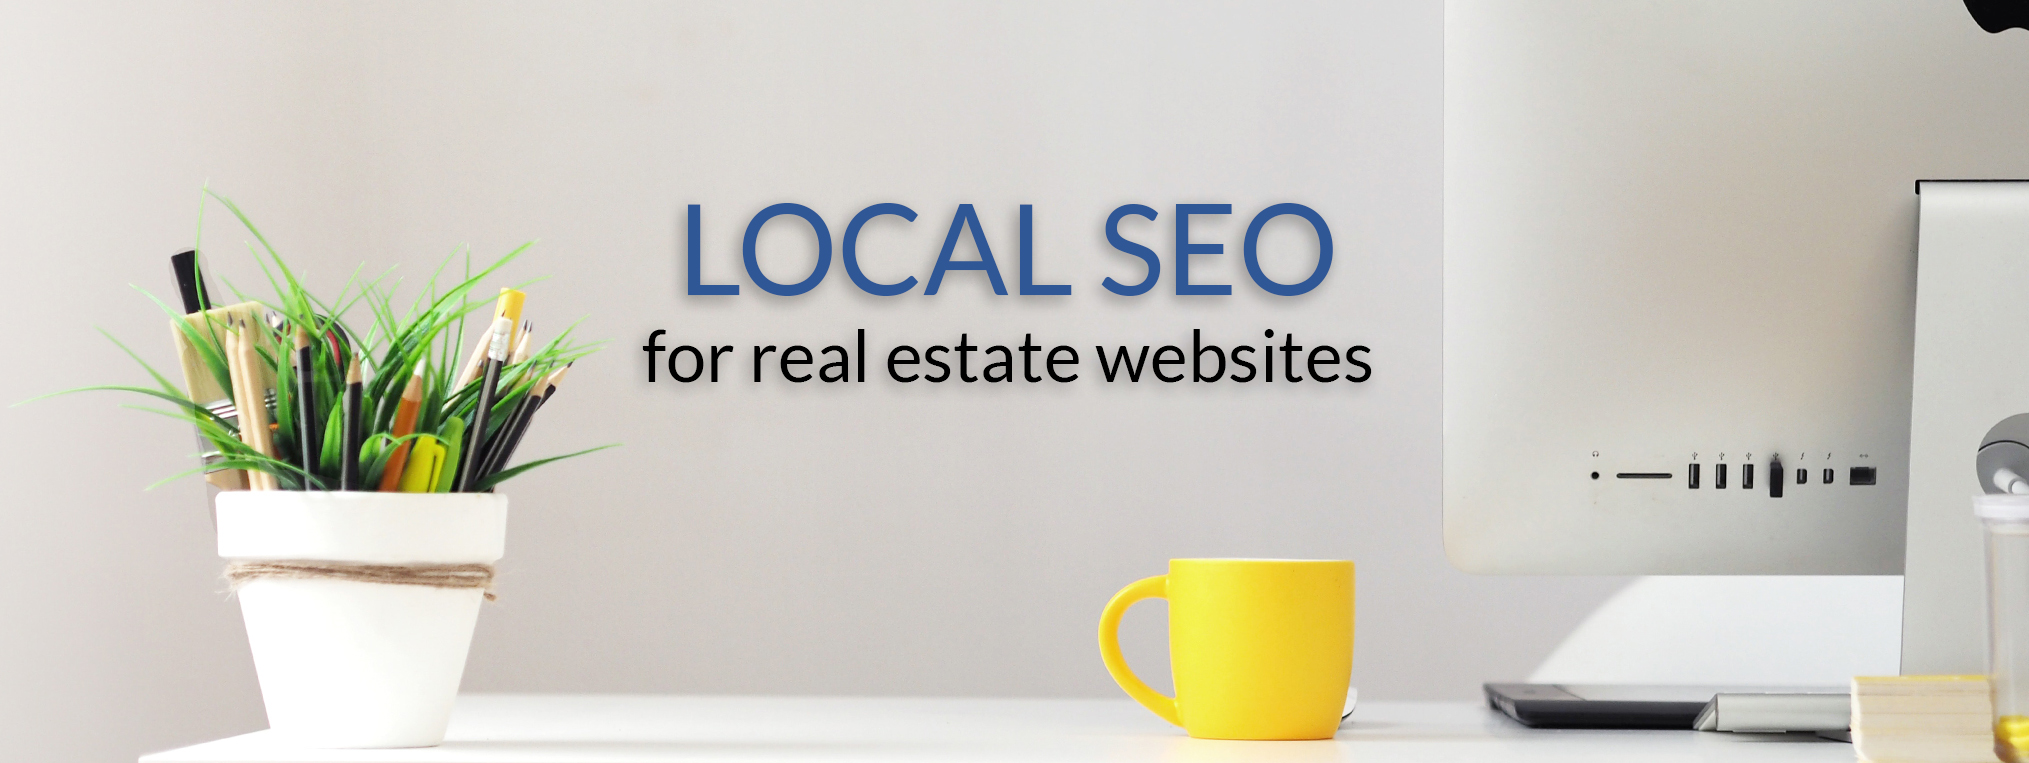 Win Digital Marketing for Real Estate with Ads, Not Just SEO -